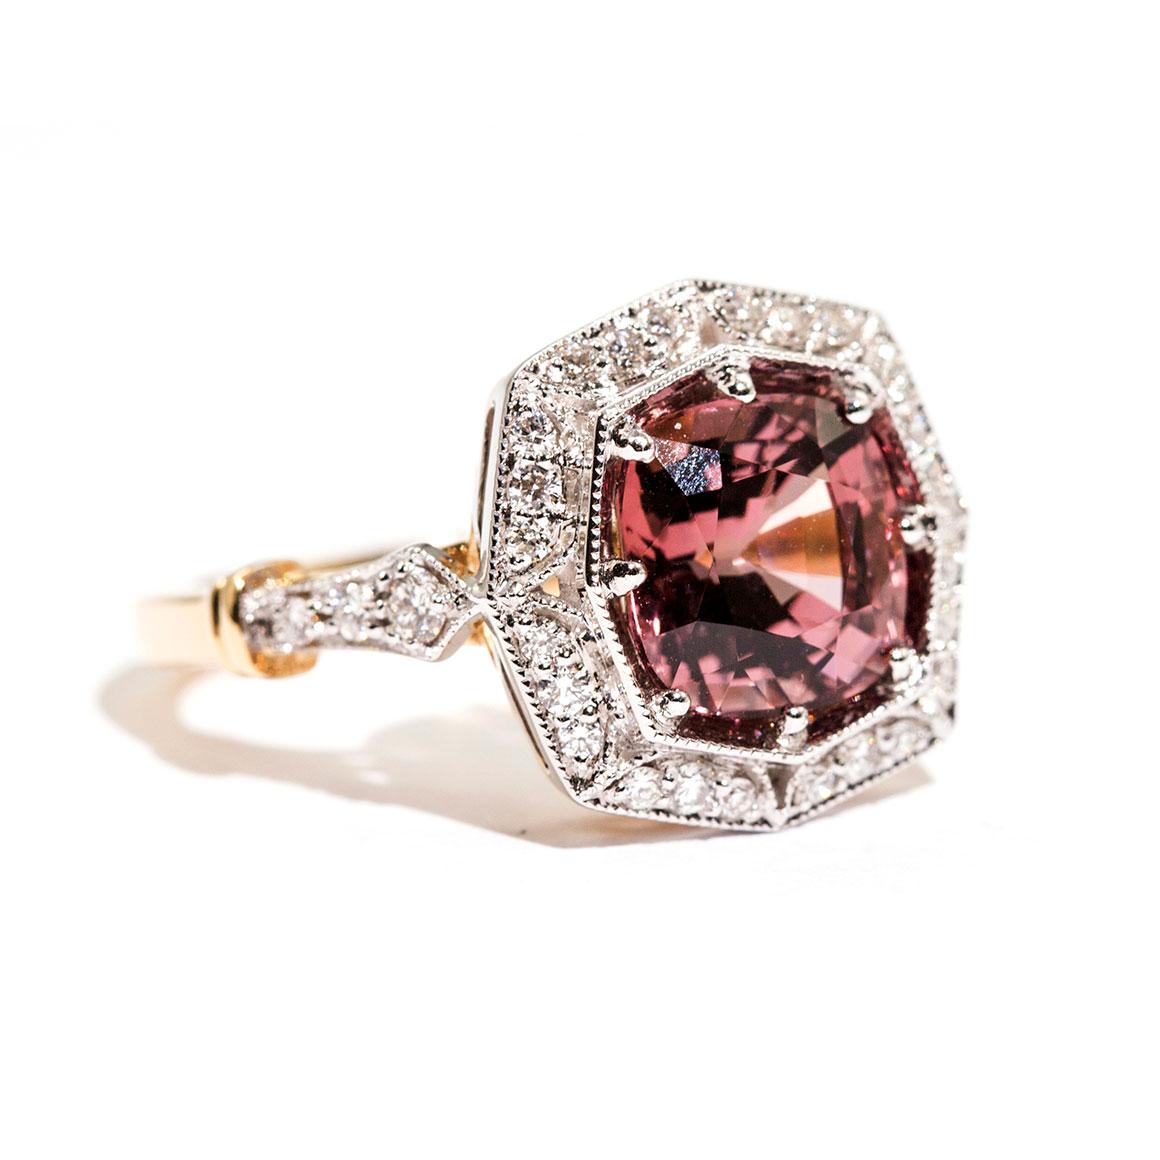 Forged in 18 carat yellow and white gold is this vintage inspired halo ring that features a striking 3.16 carat bright reddish pink cushion cut natural spinel complimented by a total of 0.31 carats of sparkling round brilliant cut diamonds. We have